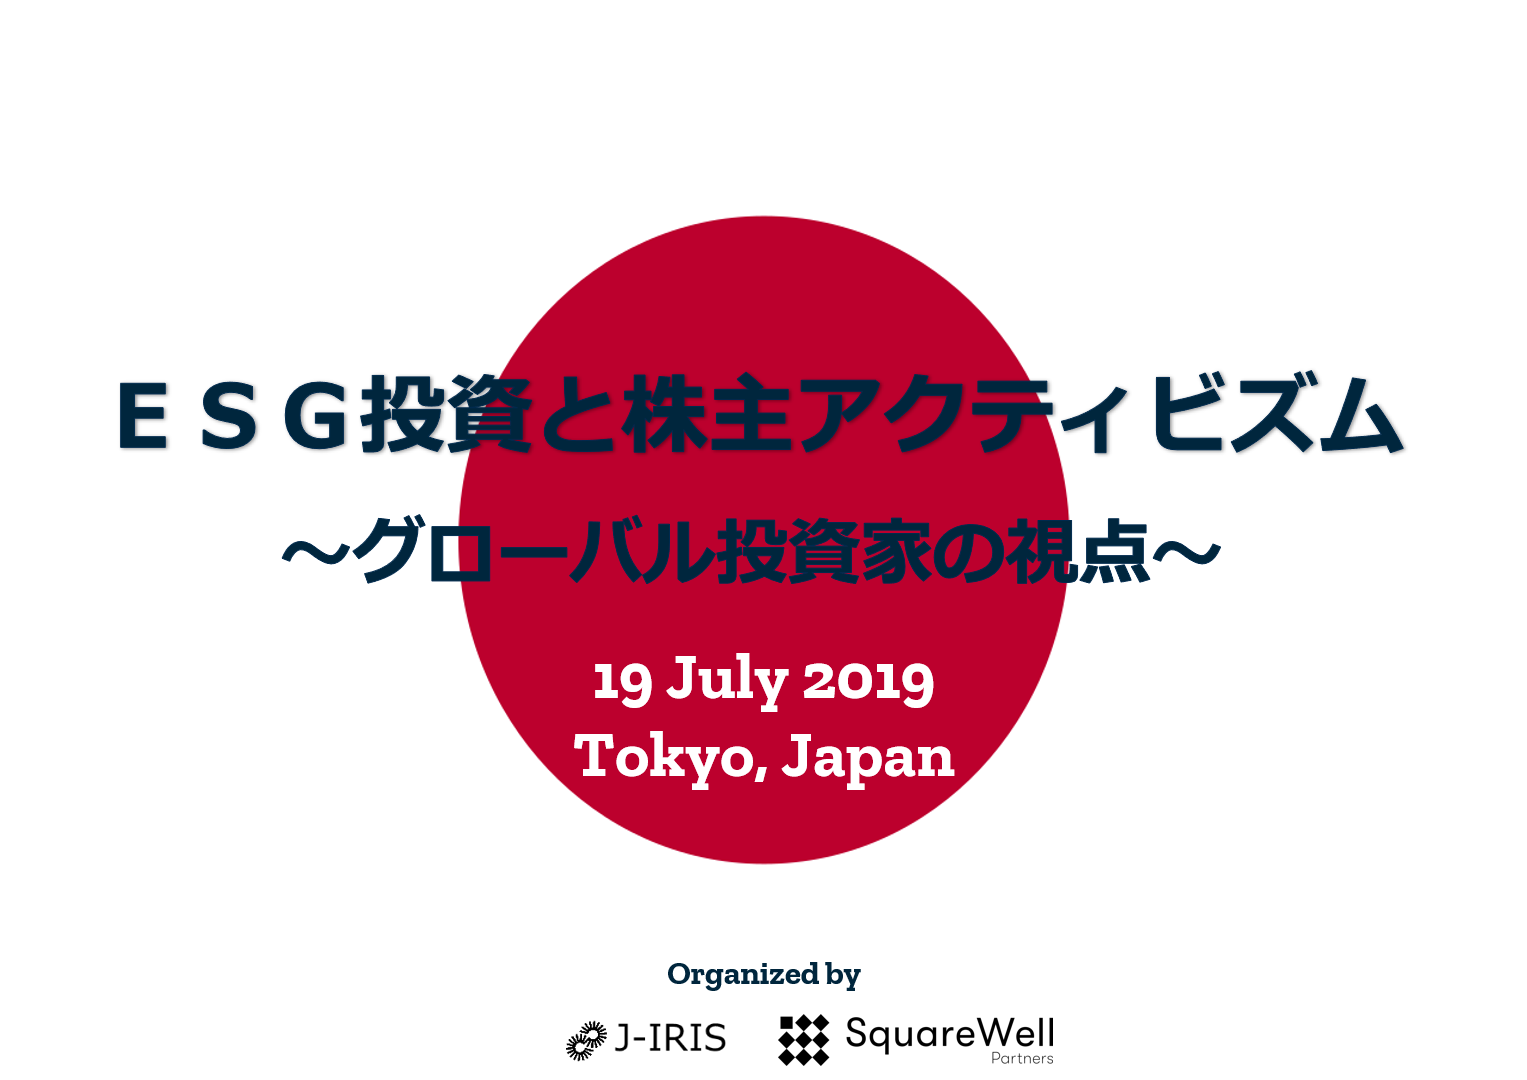 SquareWell Event on ESG and Activism in Japan